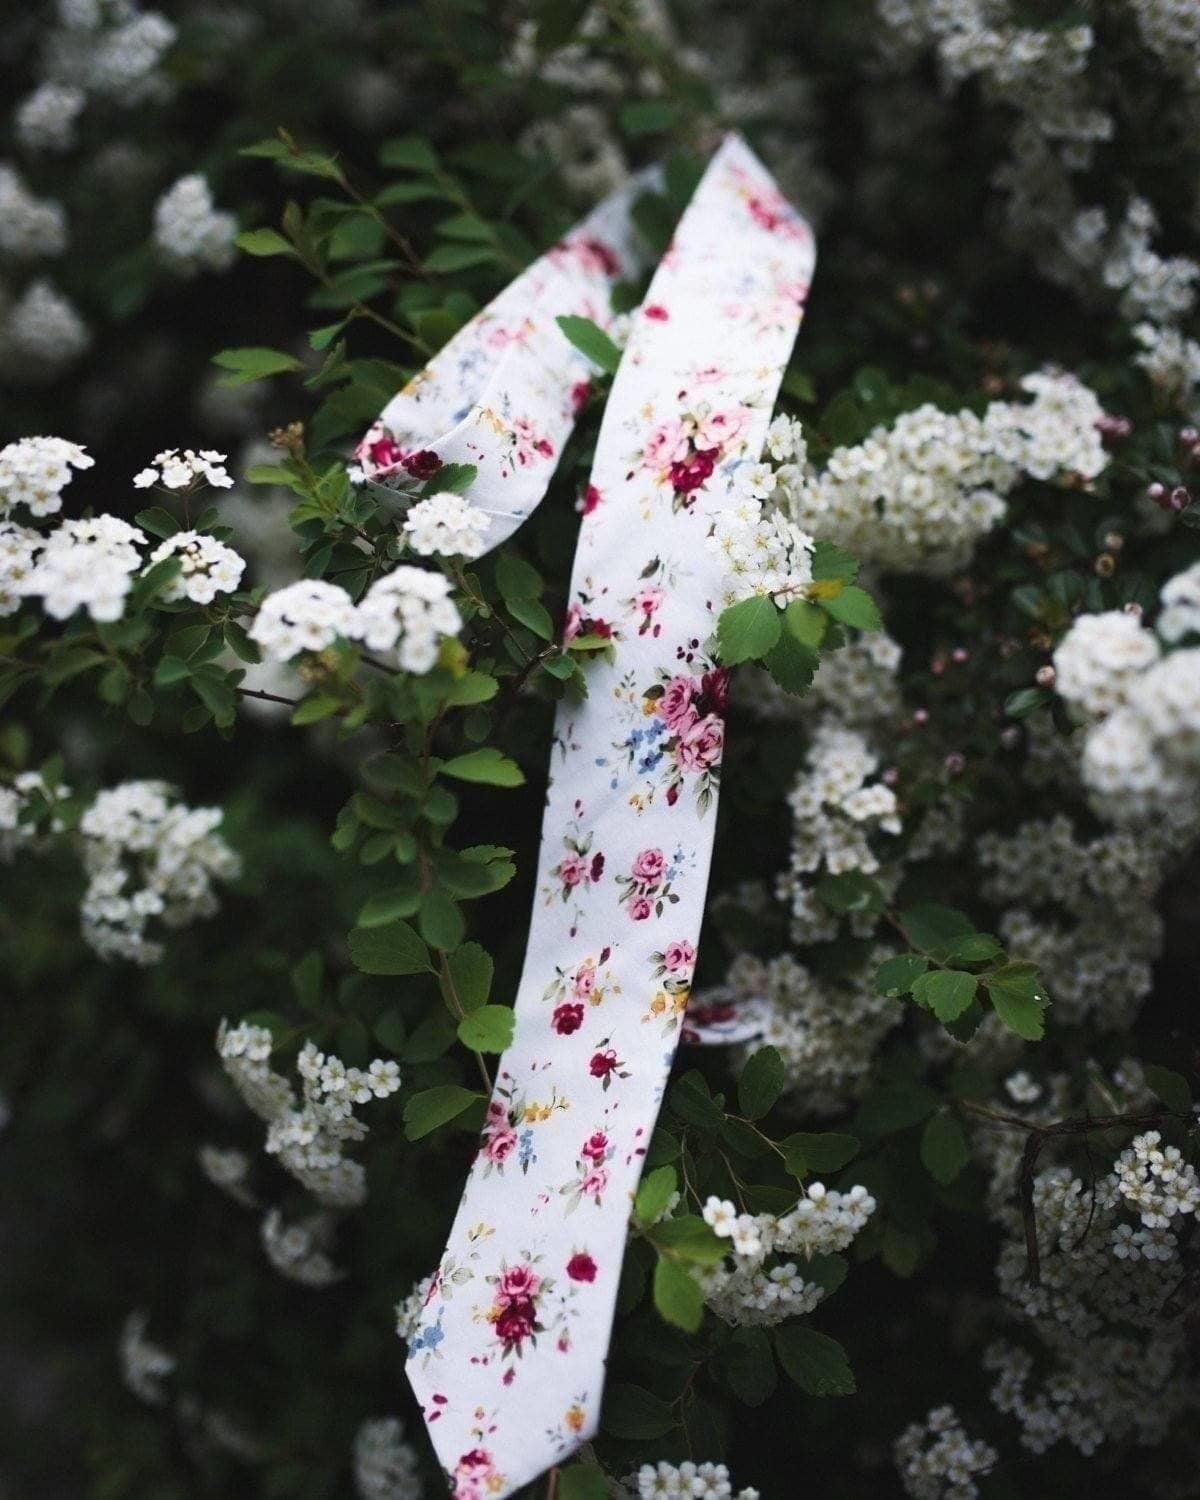 White Floral Skinny Tie 2.36&quot; BENJAMIN MYTIESHOP-Neckties-White Floral Skinny Tie BENJAMIN Floral Skinny Tie Men’s Floral Necktie for weddings and events, great for prom and anniversary gifts near me us ties tie-Mytieshop. Skinny ties for weddings anniversaries. Father of bride. Groomsmen. Cool skinny neckties for men. Neckwear for prom, missions and fancy events. Gift ideas for men. Anniversaries ideas. Wedding aesthetics. Flower ties. Dry flower ties.